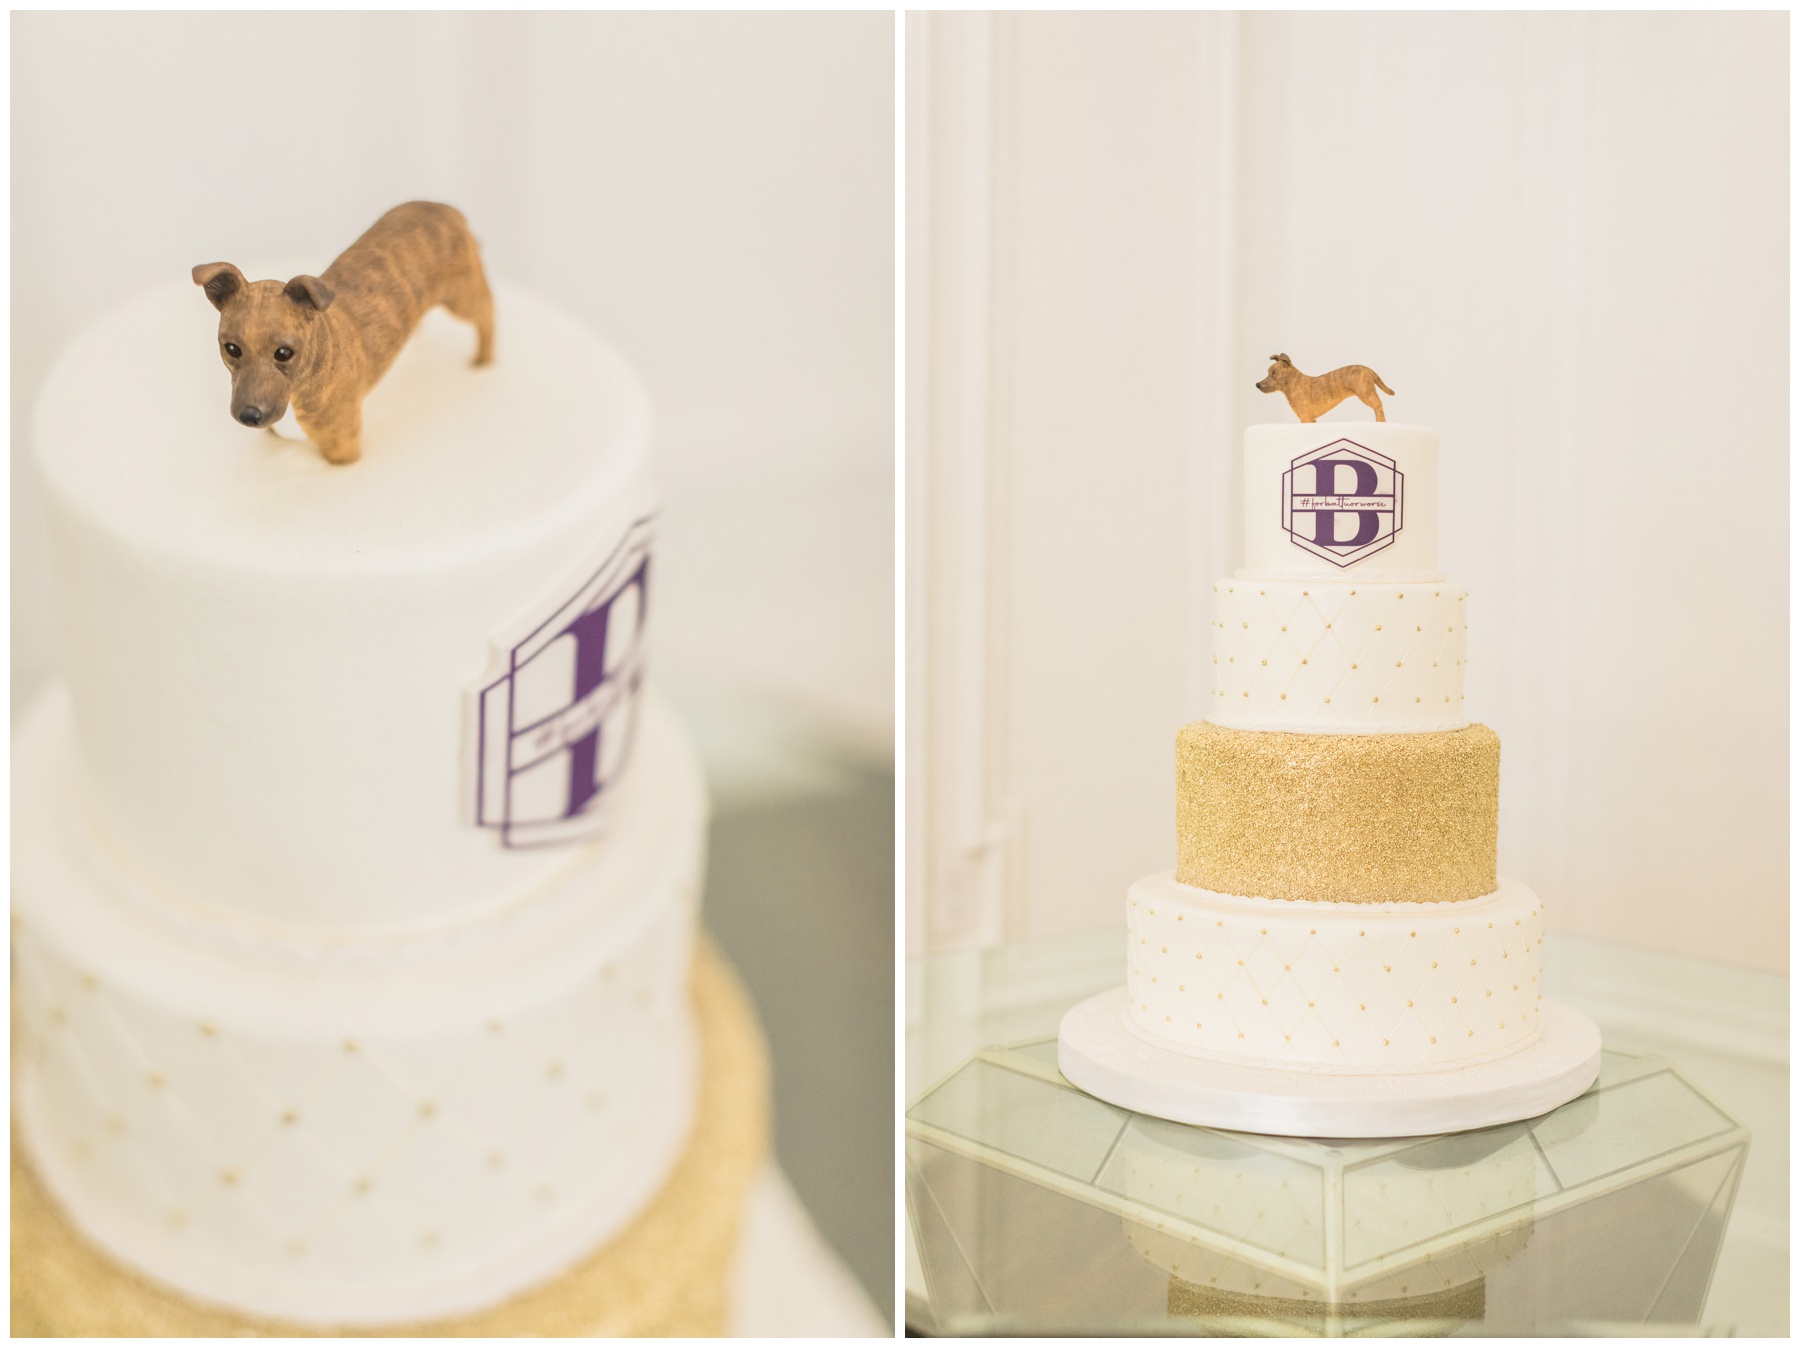 White and gold wedding cake with a custom dog cake topper from Supreme Kakes